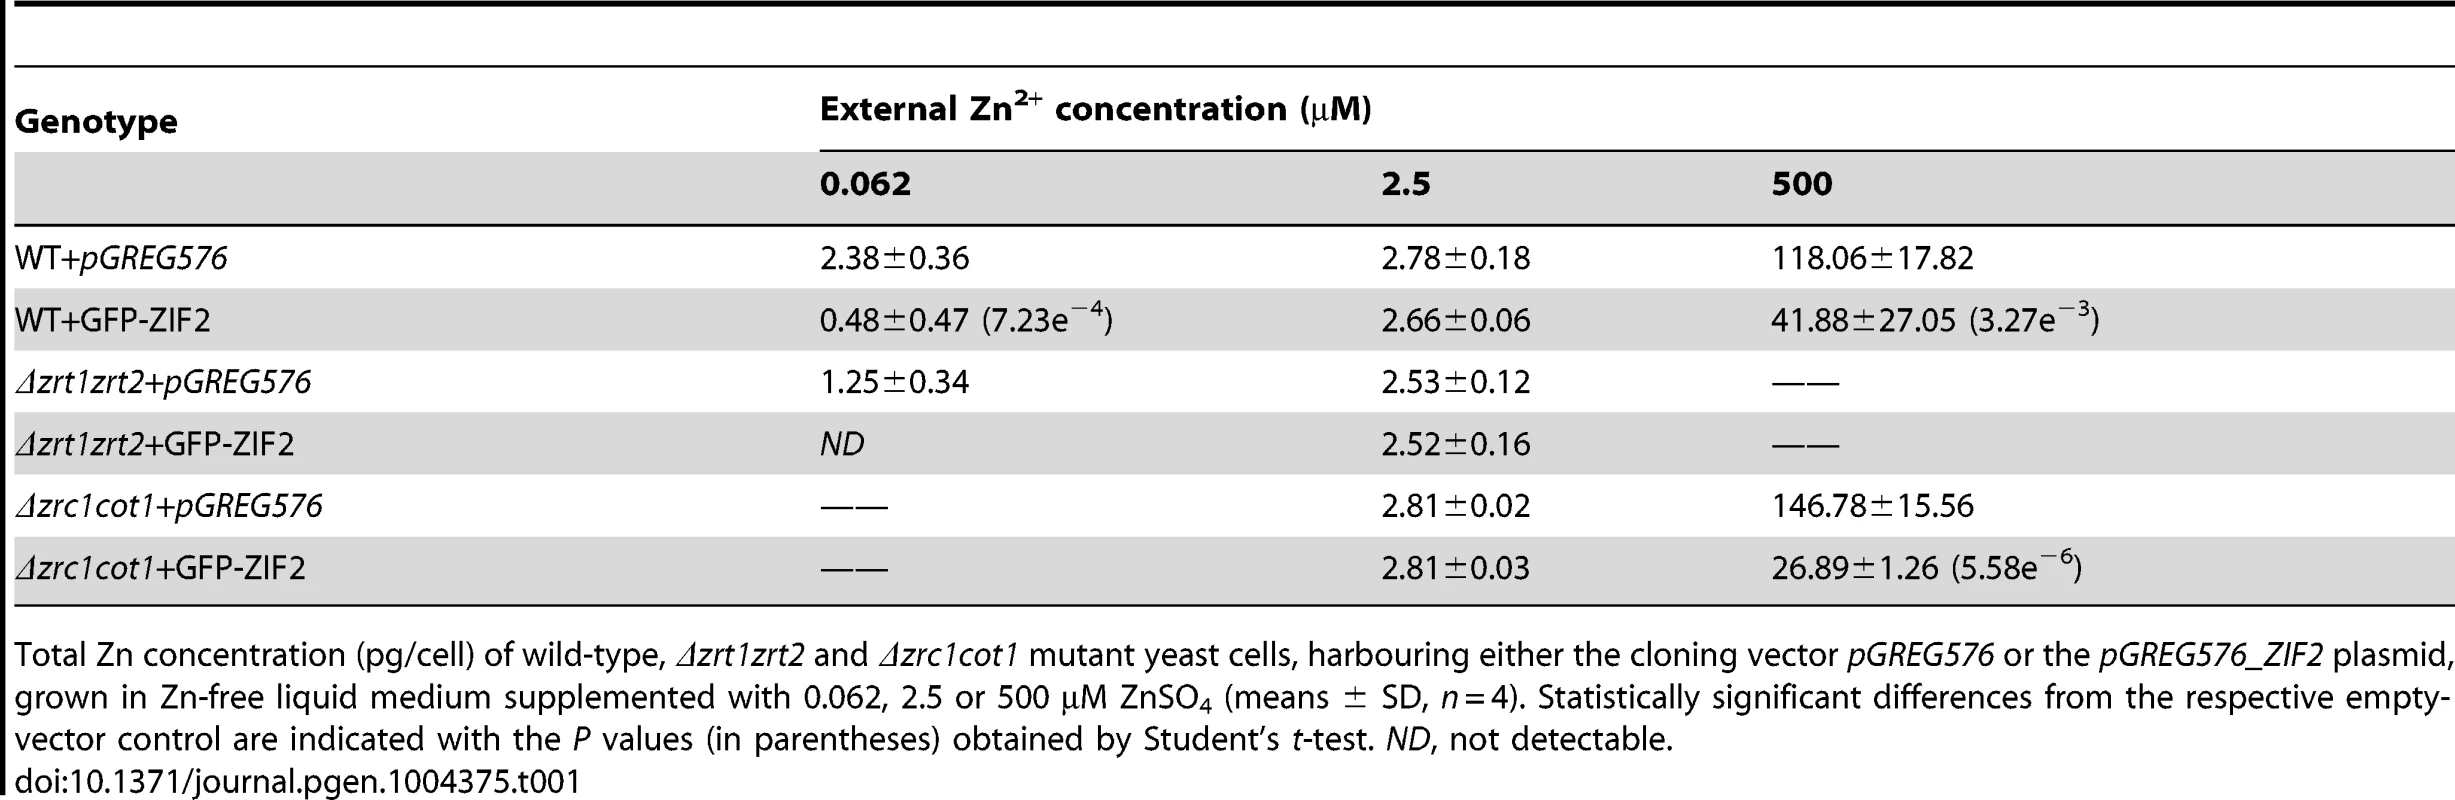 Effect of GFP-ZIF2 expression on the zinc content of yeast cells.